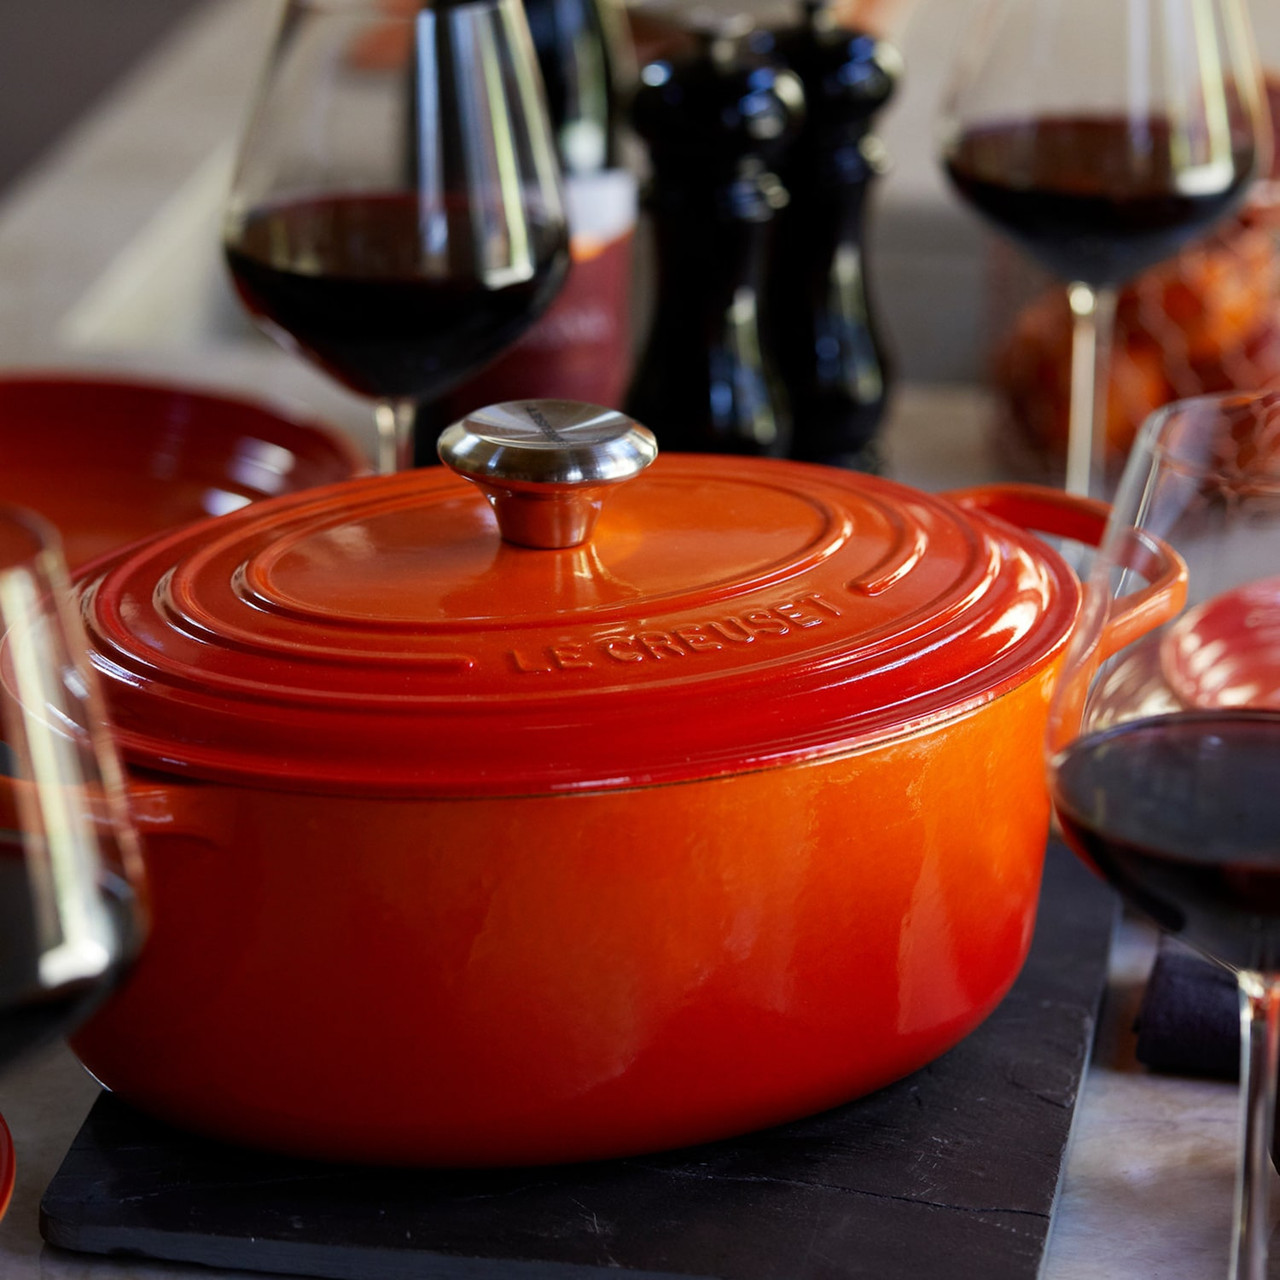 https://cdn11.bigcommerce.com/s-hccytny0od/images/stencil/1280x1280/products/3676/14538/le-creuset-oval-dutch-oven-flame__49787.1617191584.jpg?c=2?imbypass=on